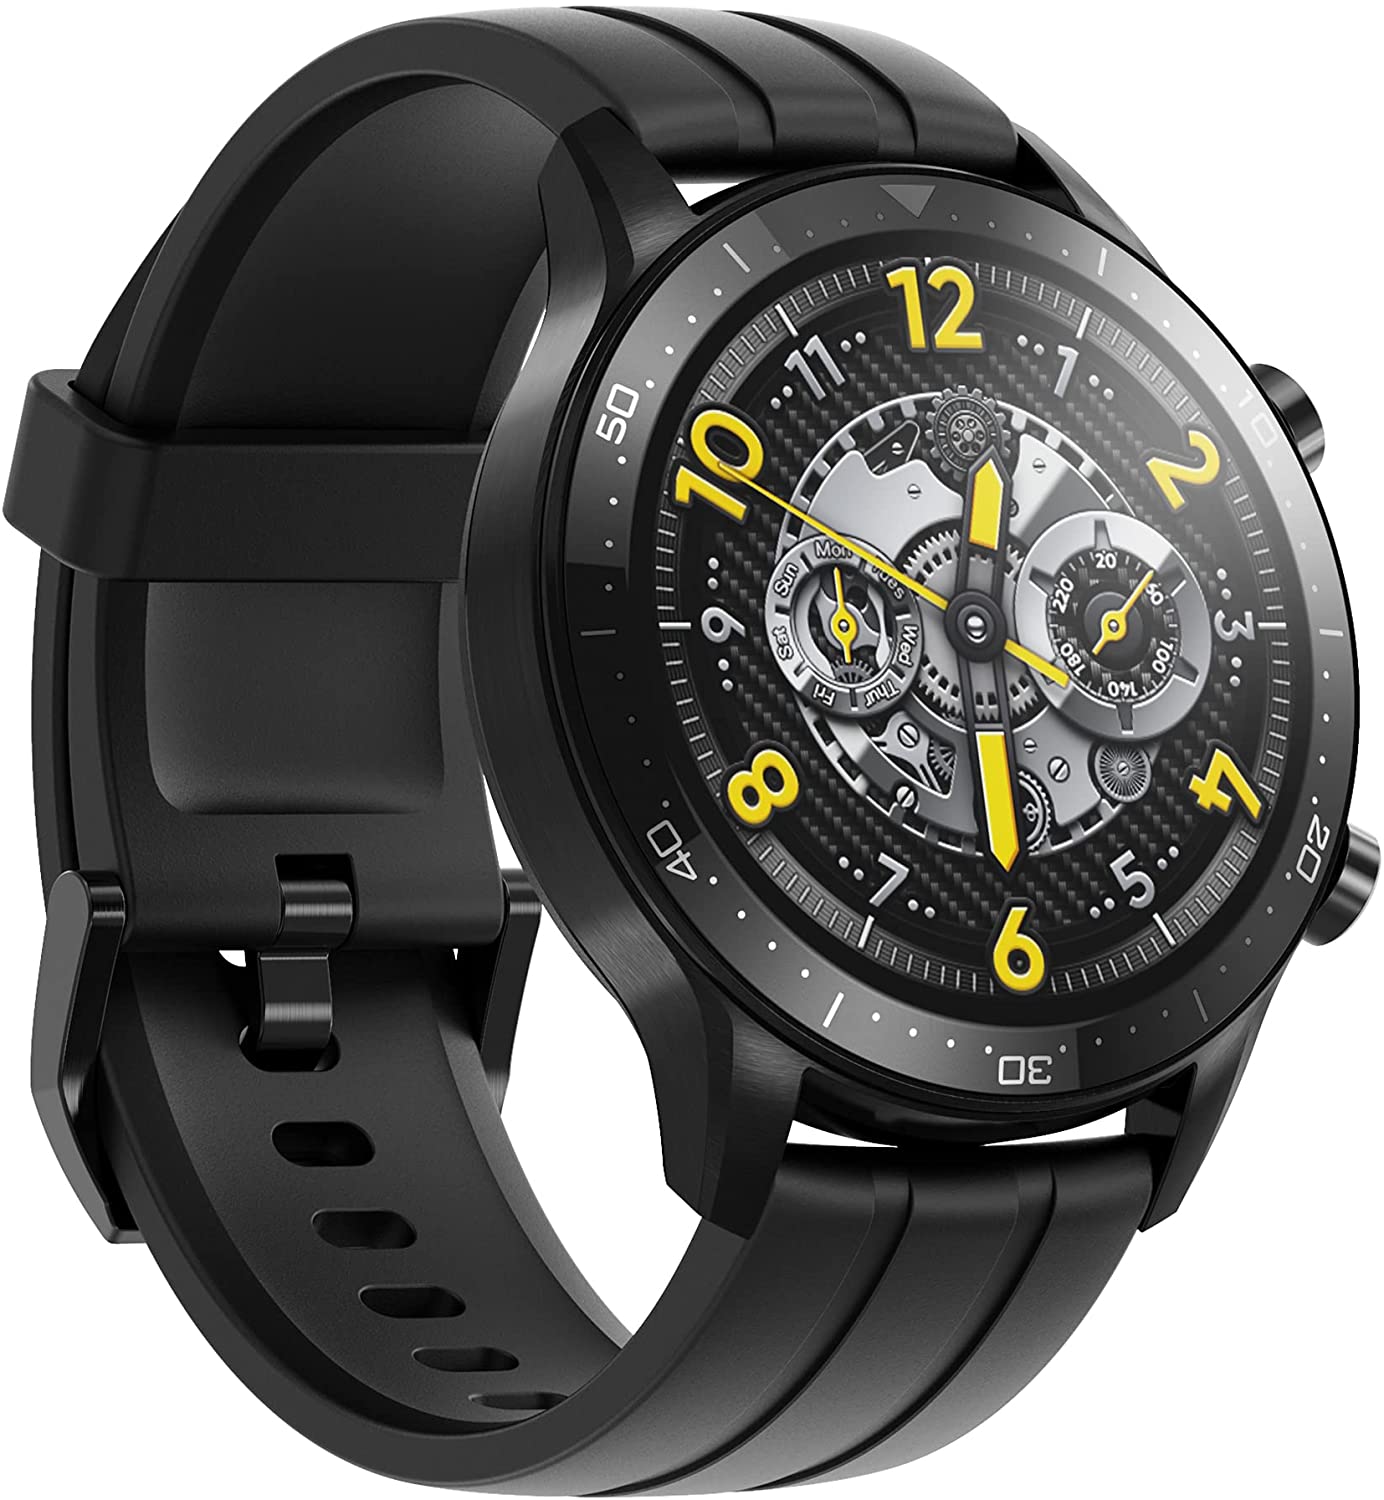 Realme Smart Watch S Pro with 1.39" AMOLED Touchscreen, 14 Days Battery Life, SpO2 & Heart Rate Monitoring, 5ATM Water Resistance